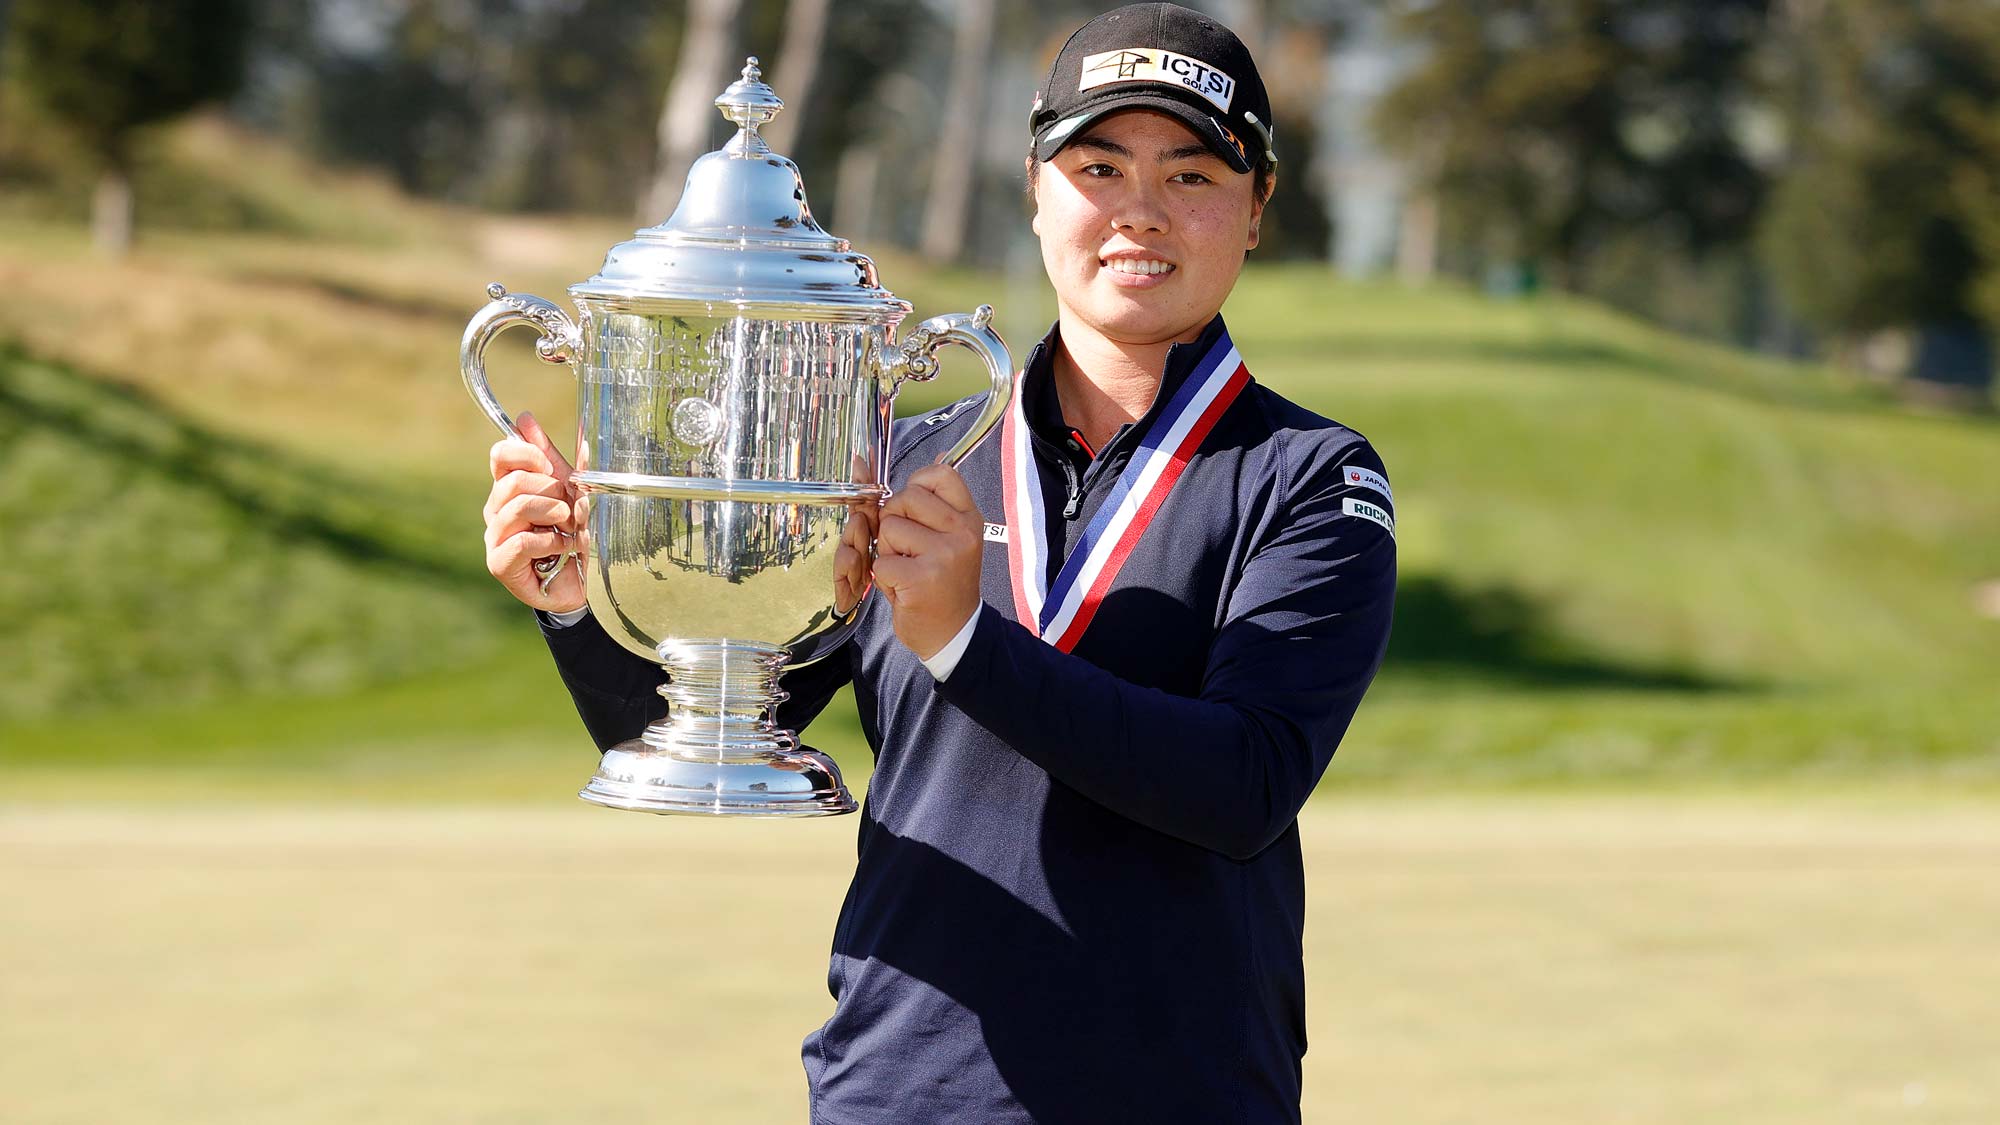 Yuka Saso of the Philippines celebrates with the Harton S. Semple Trophy after winning the 76th U.S. Women's Open Championship